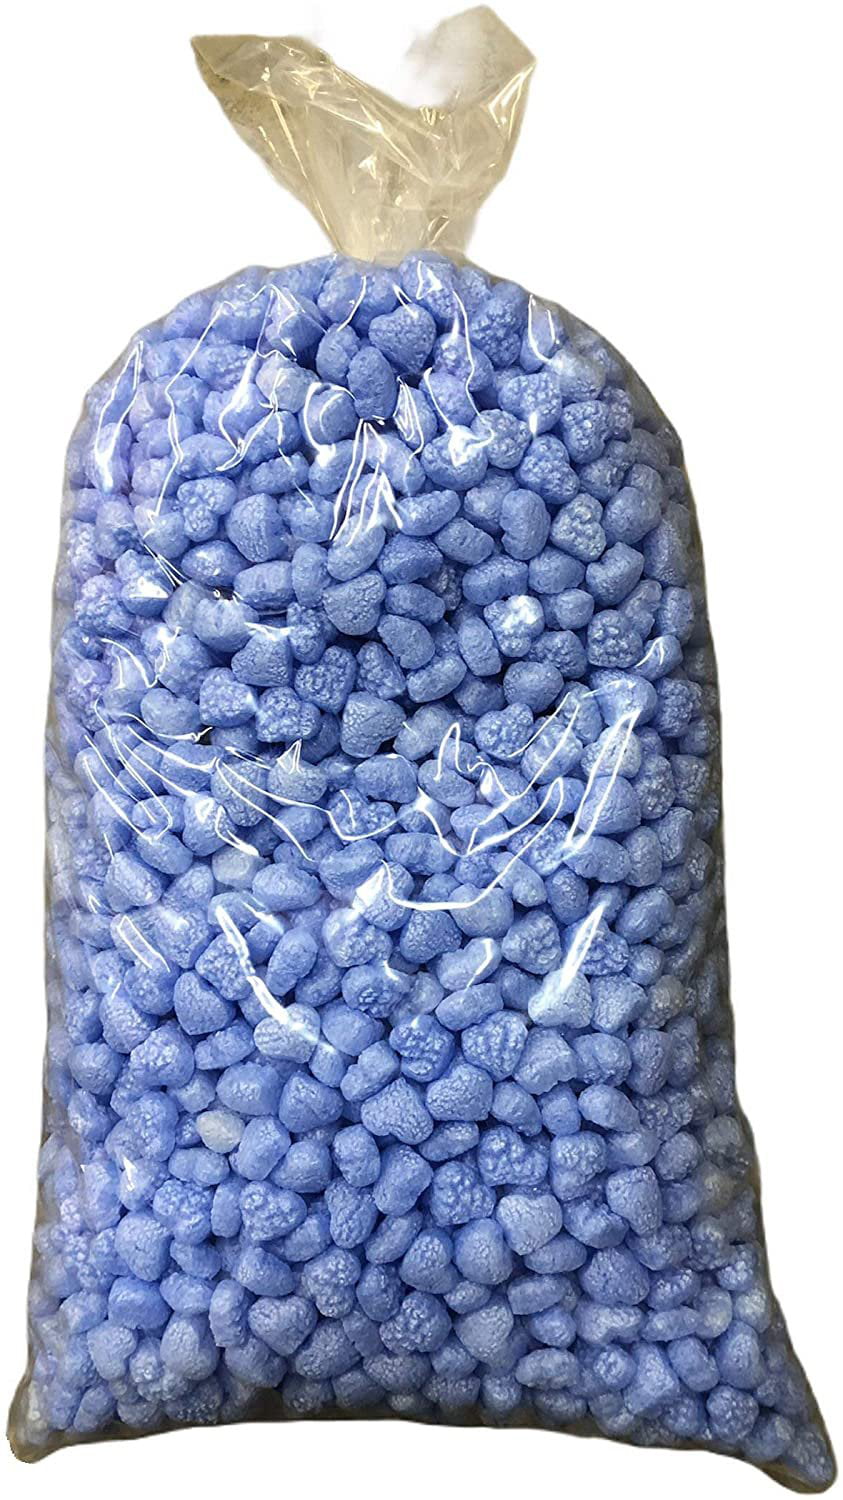 6 cuft. Bio Degradable Packing Peanuts 